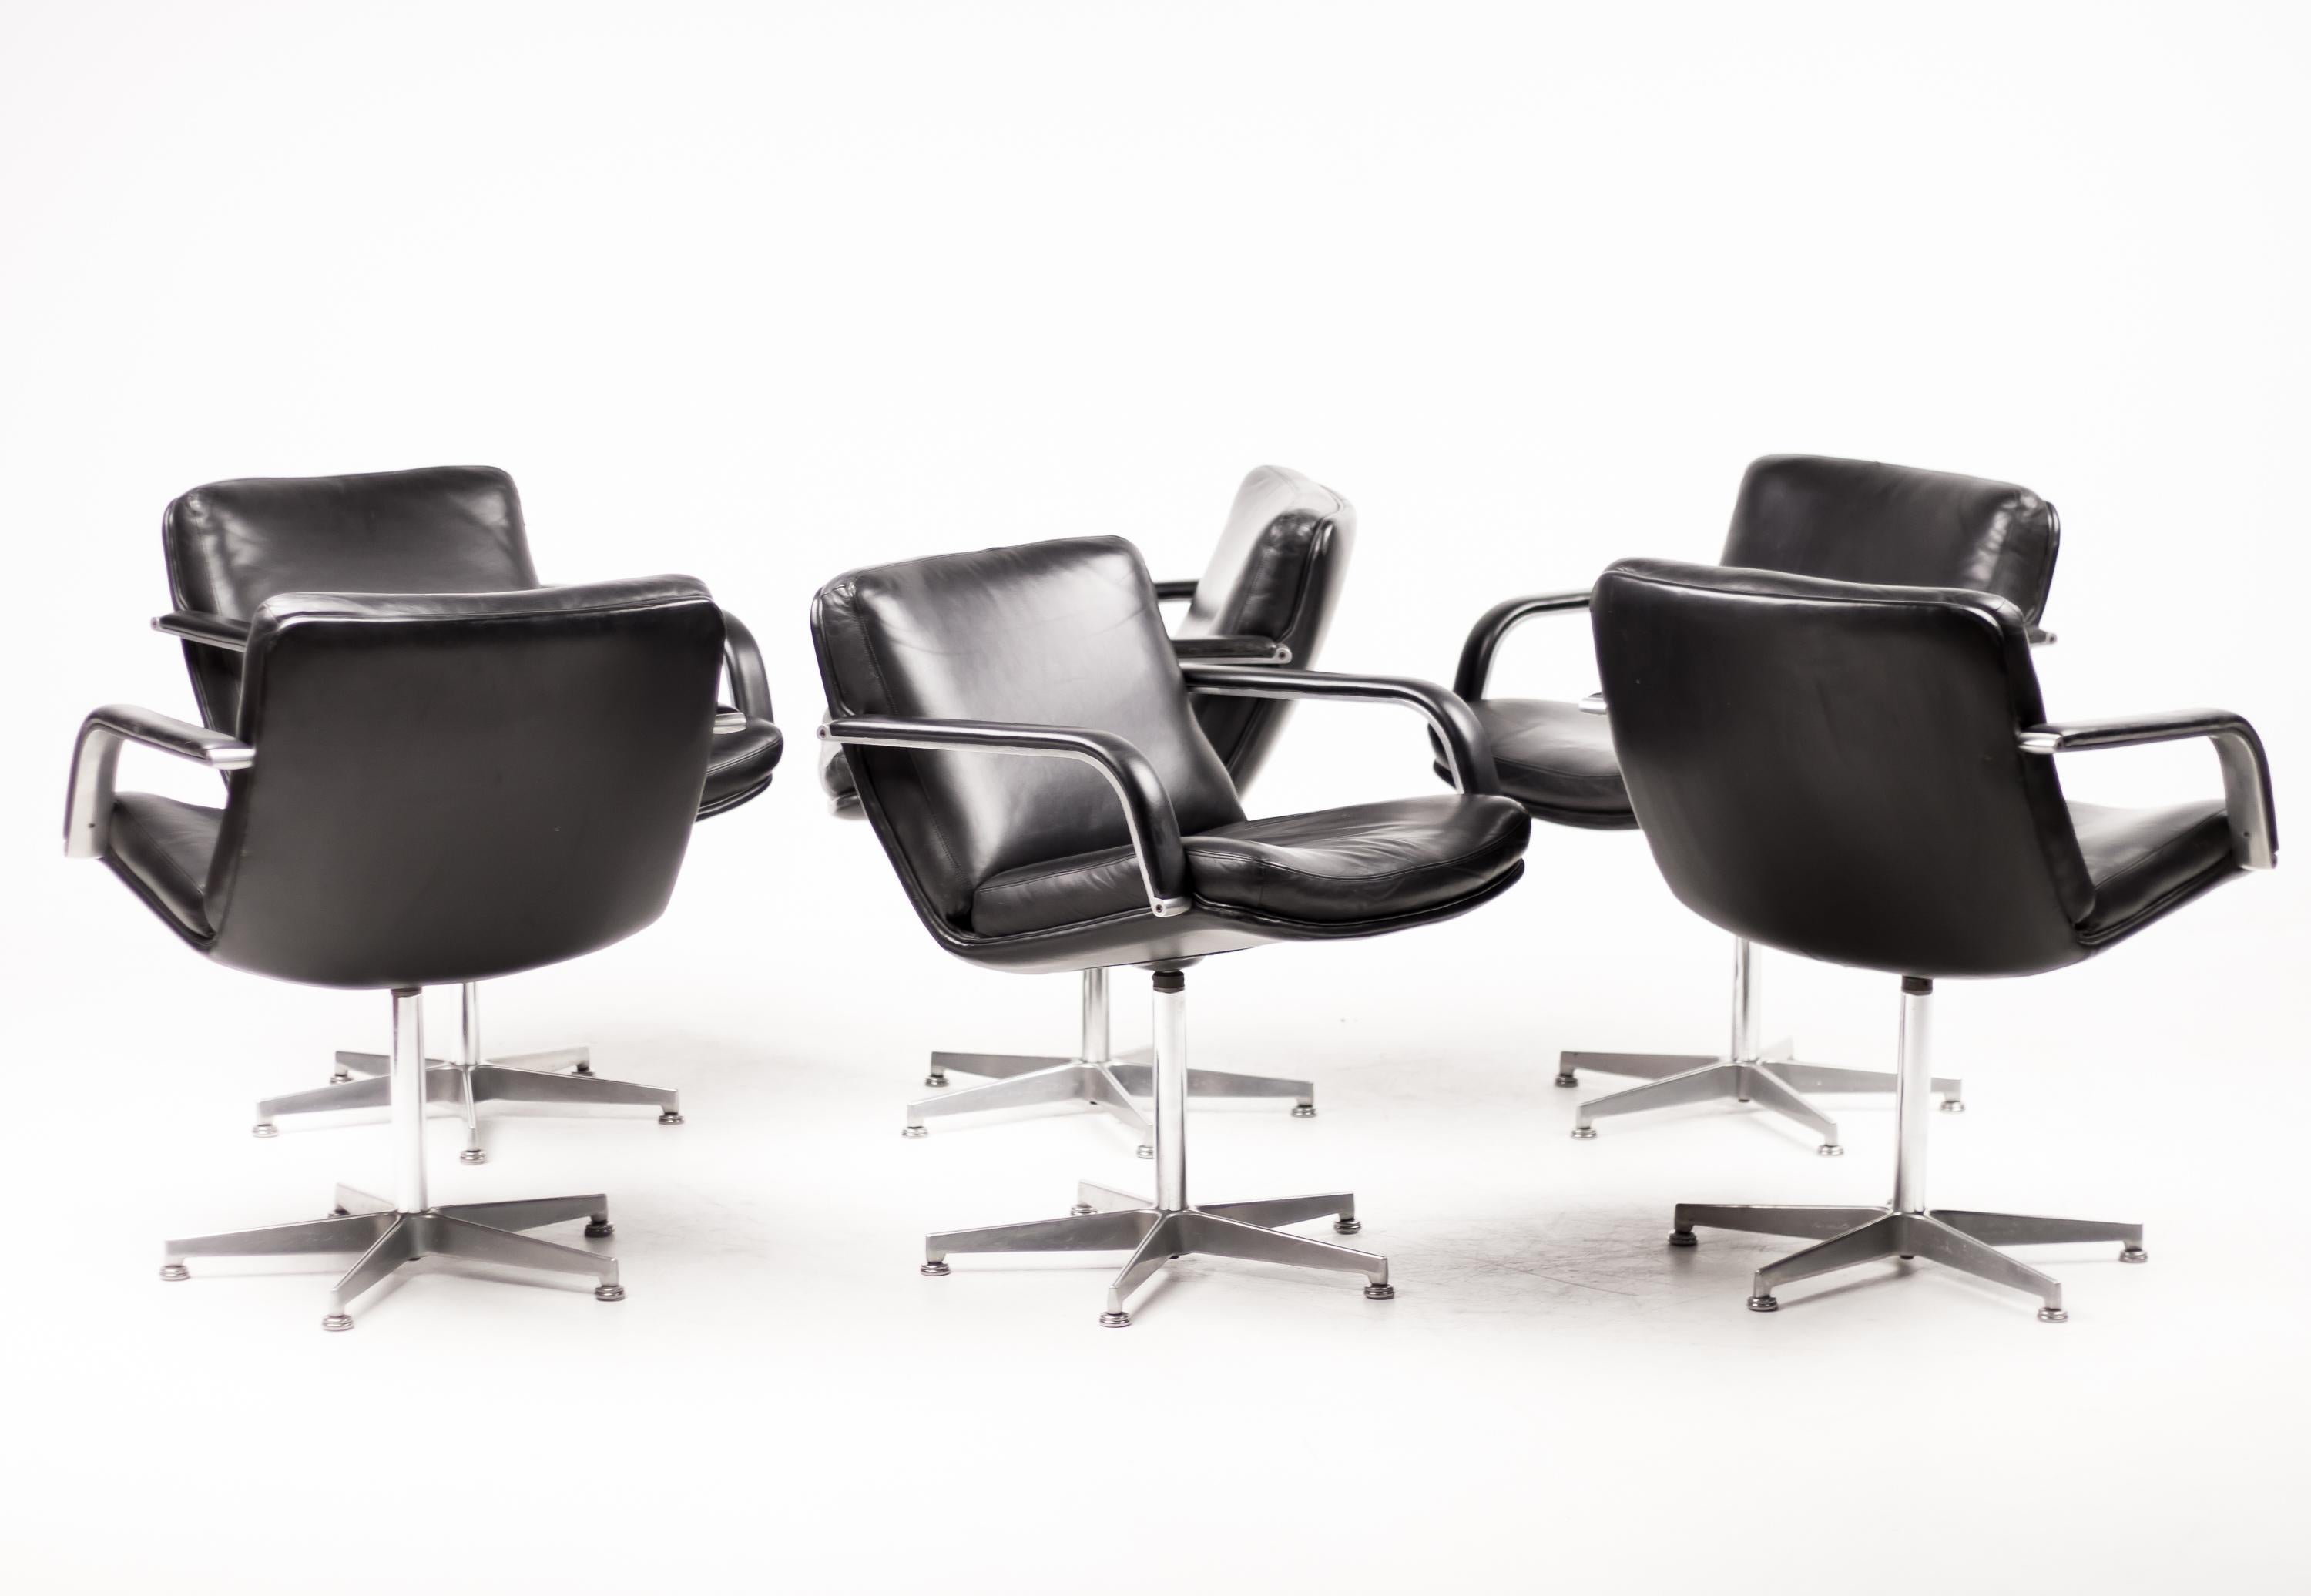 Iconic Artifort 384 chairs from the late 1960s in original black leather. 
Five star swivel base with comfortable armrests.
Marked with Artifort label.

Straight from the boardroom of an illustrious Dutch brewery.
Perfect for a Mad Men interior.